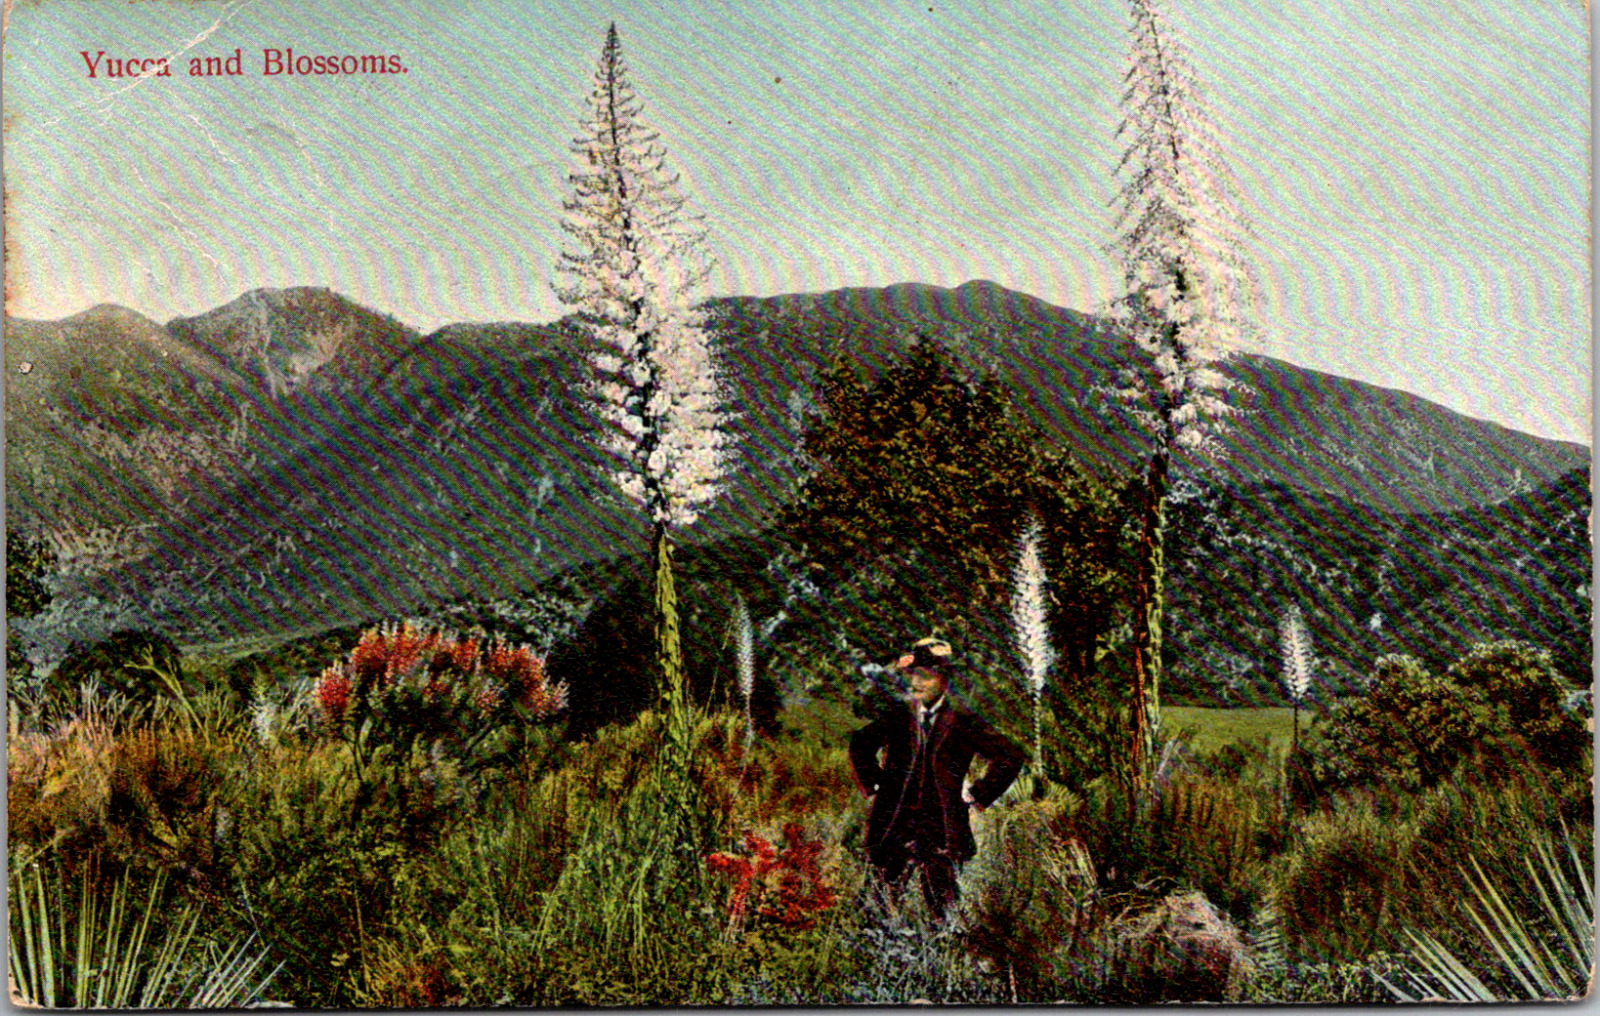 Vintage 1907 Man in Field with Yucca Blossoms Mountain Scene Postcard